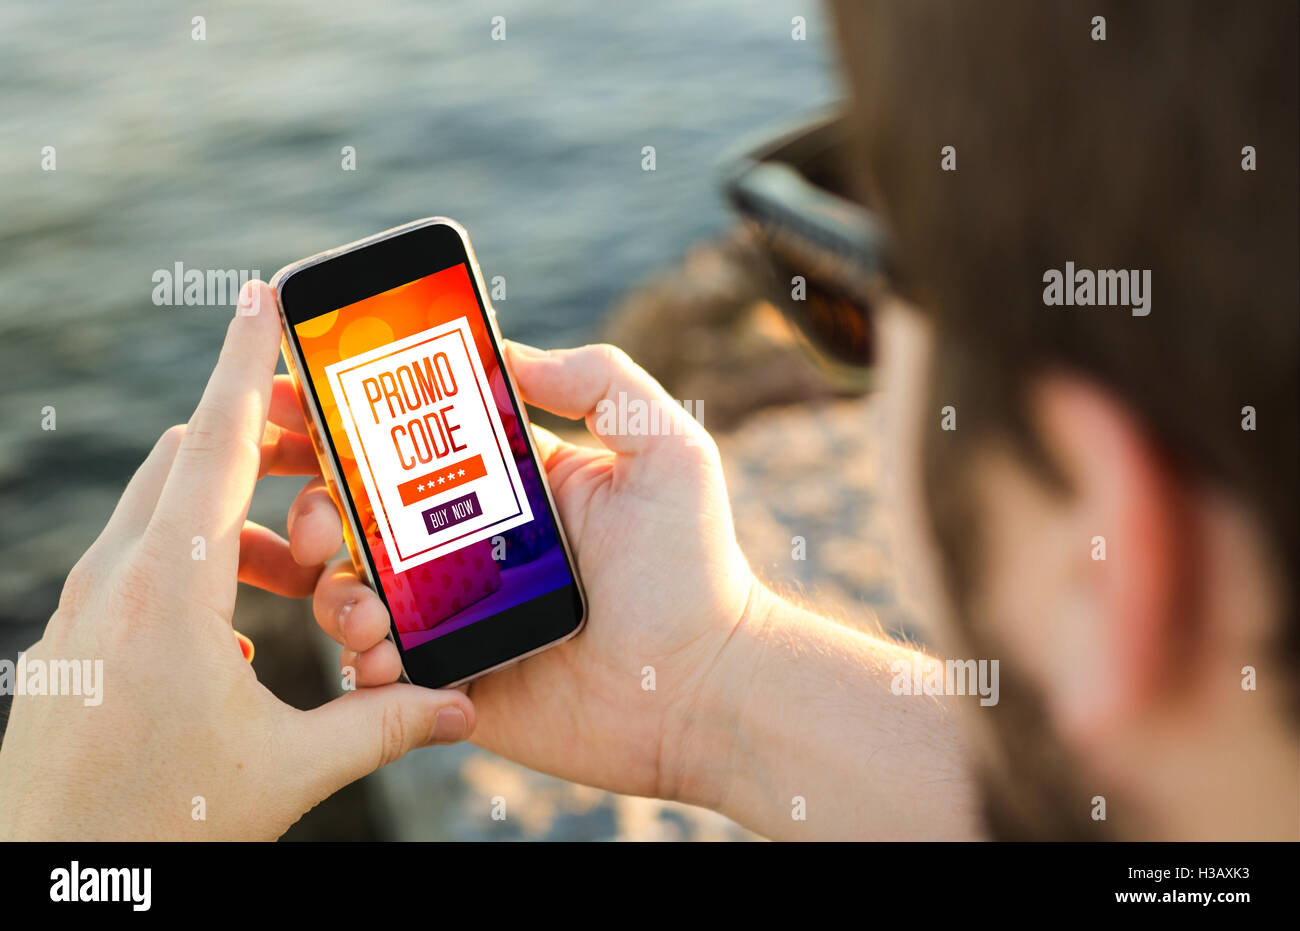 M-commerce concept: man on the coast holding his phone and using a promo code. All screen graphics are made up. Stock Photo